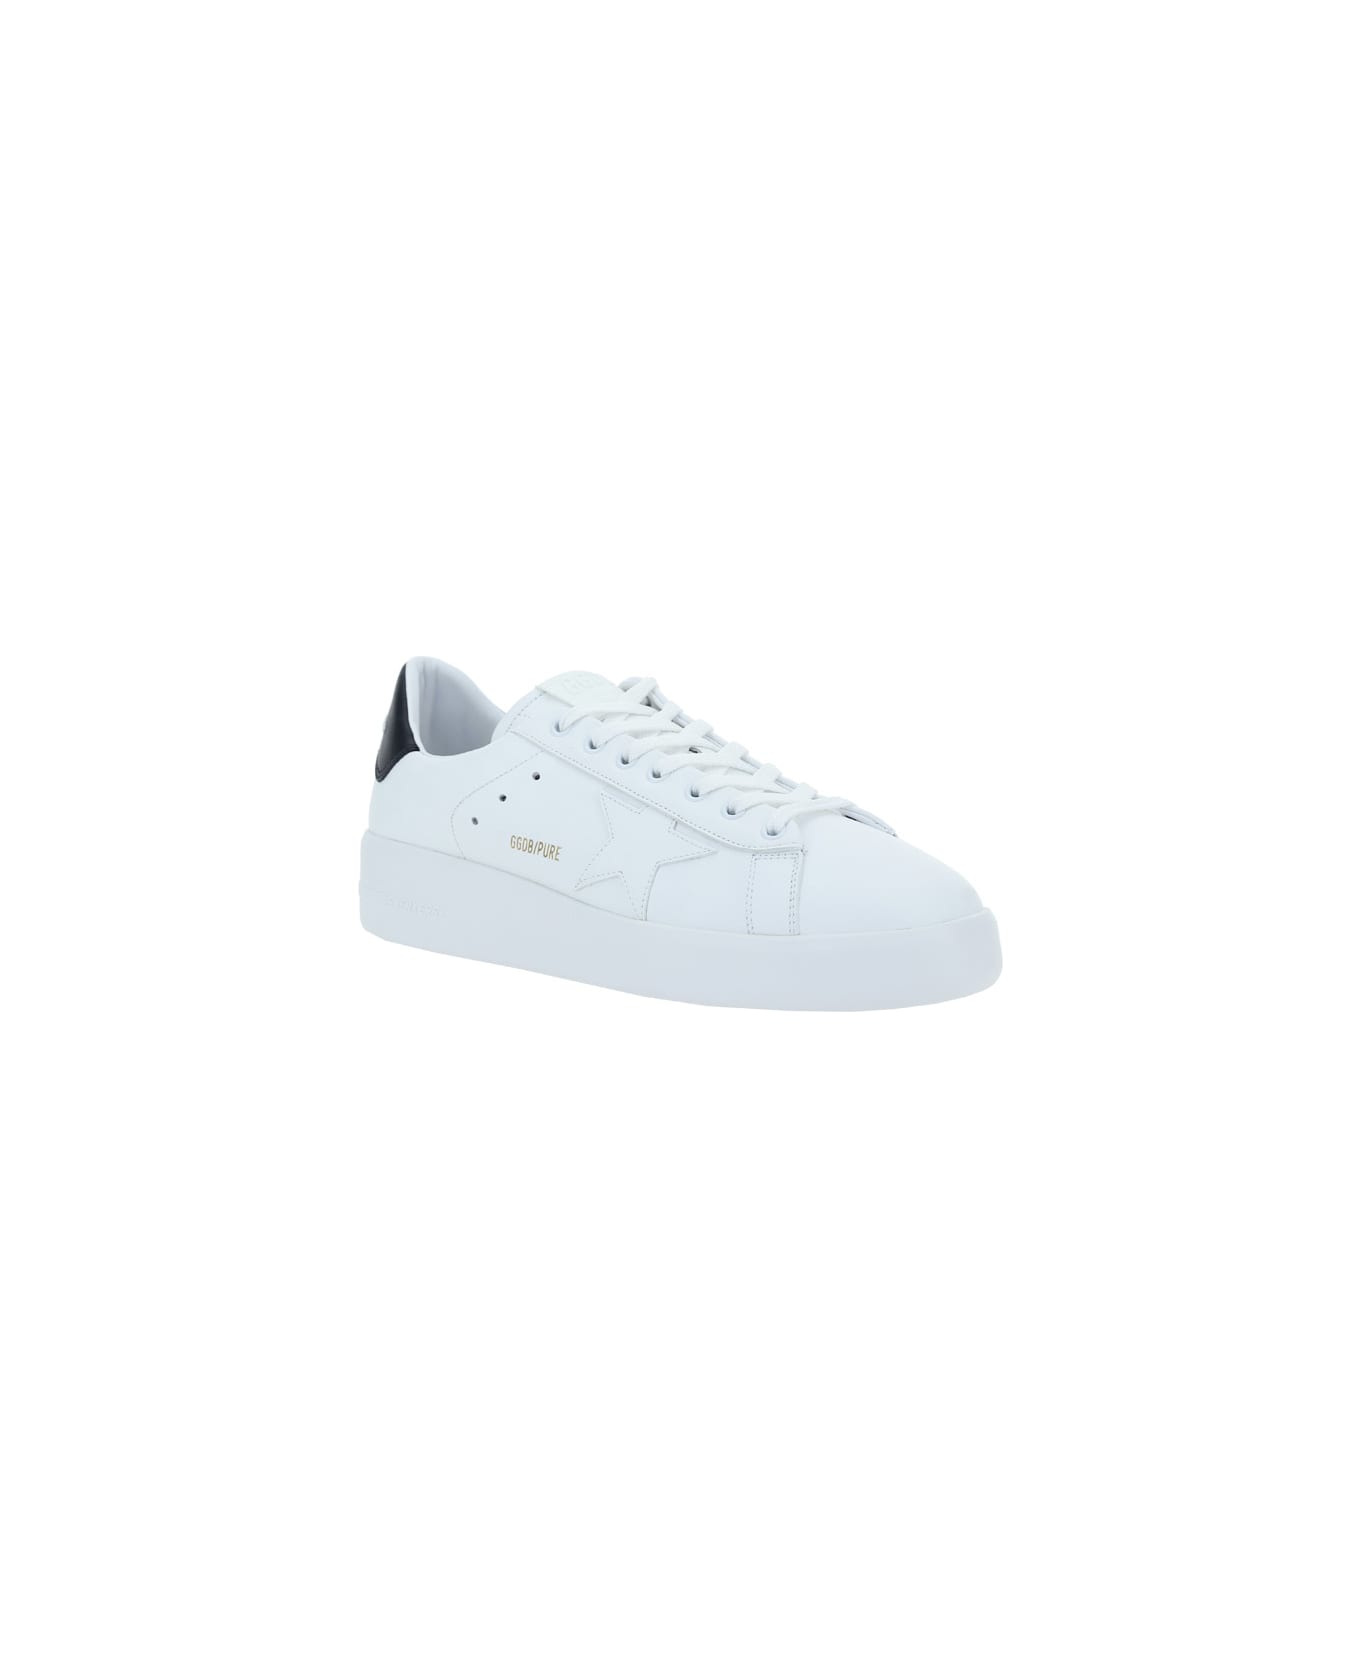 Golden Goose Pure Star Sneakers - White/black